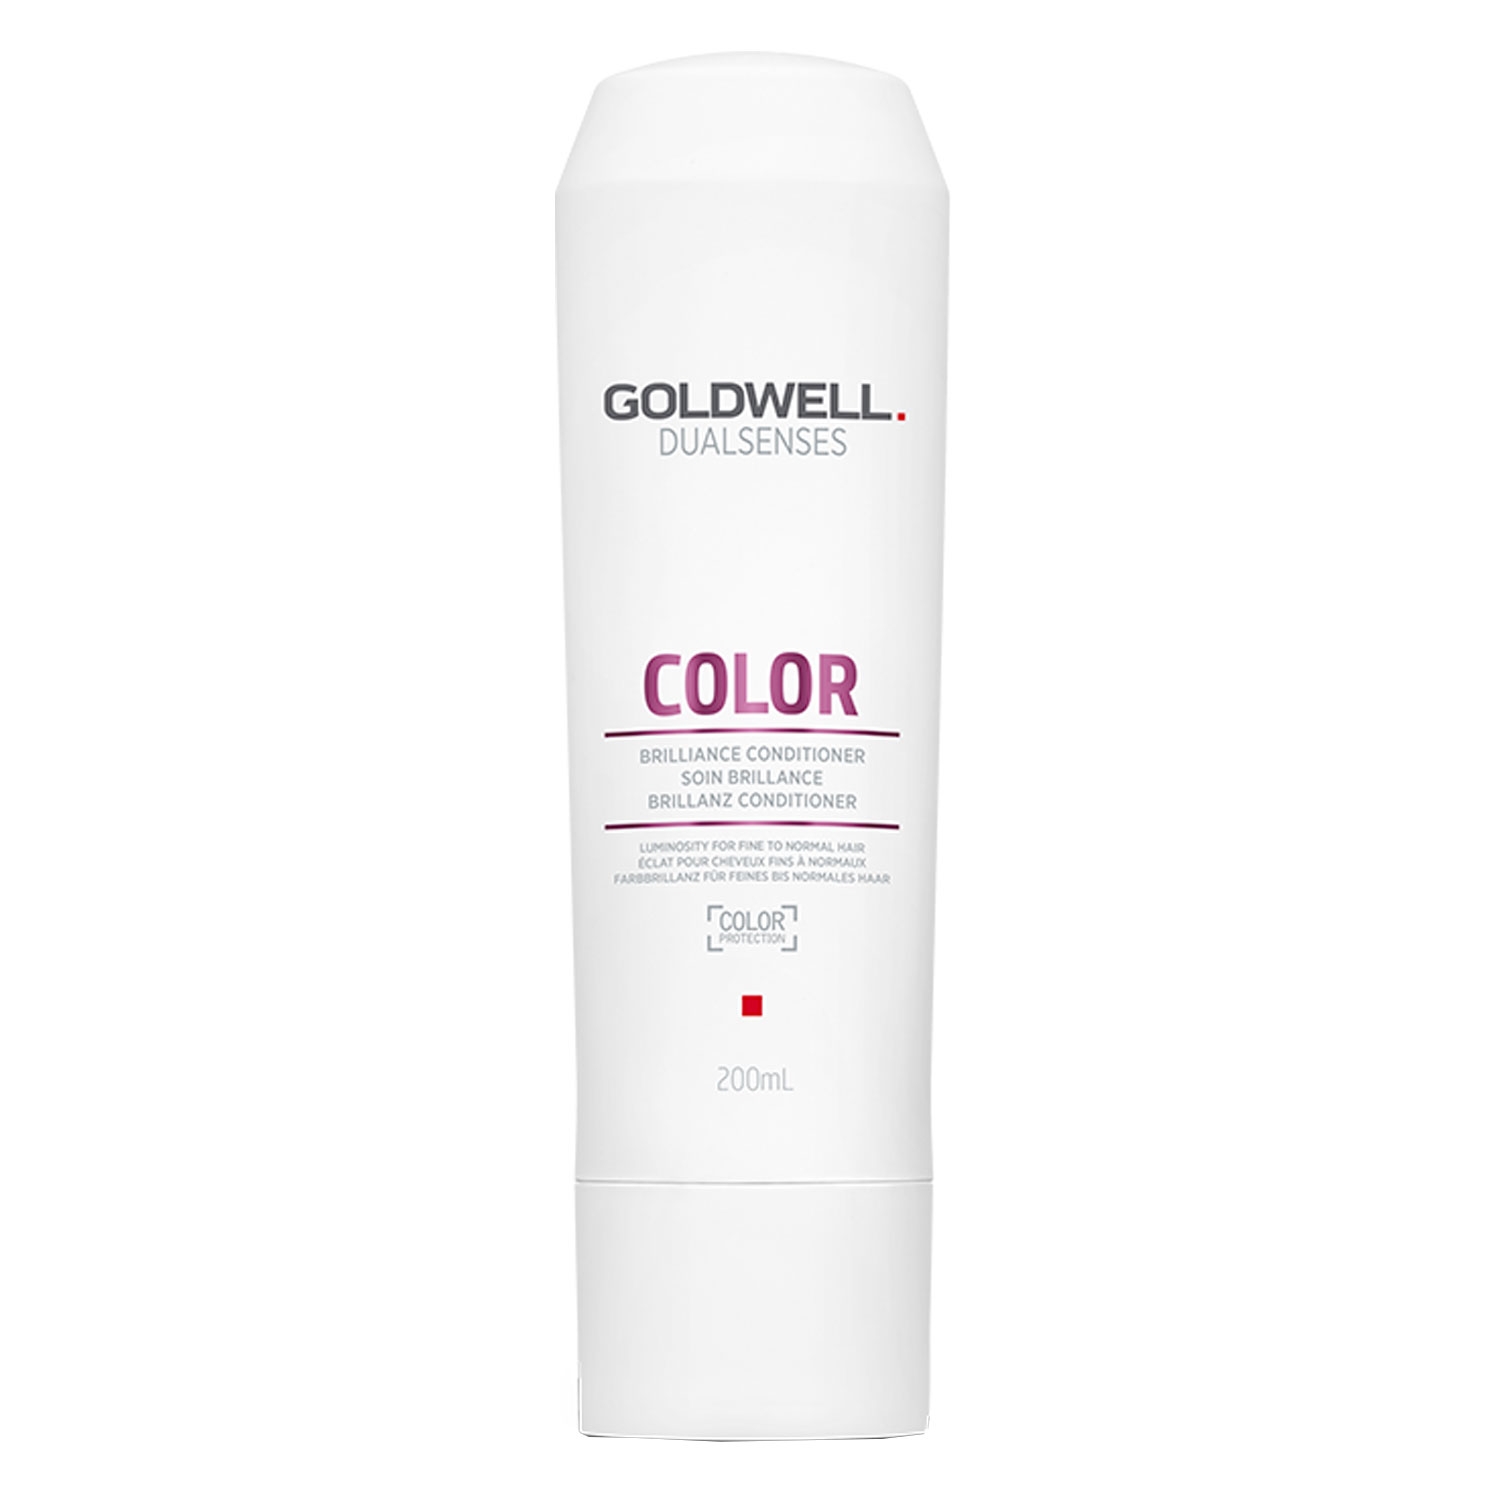 Product image from Dualsenses Color - Brilliance Conditioner